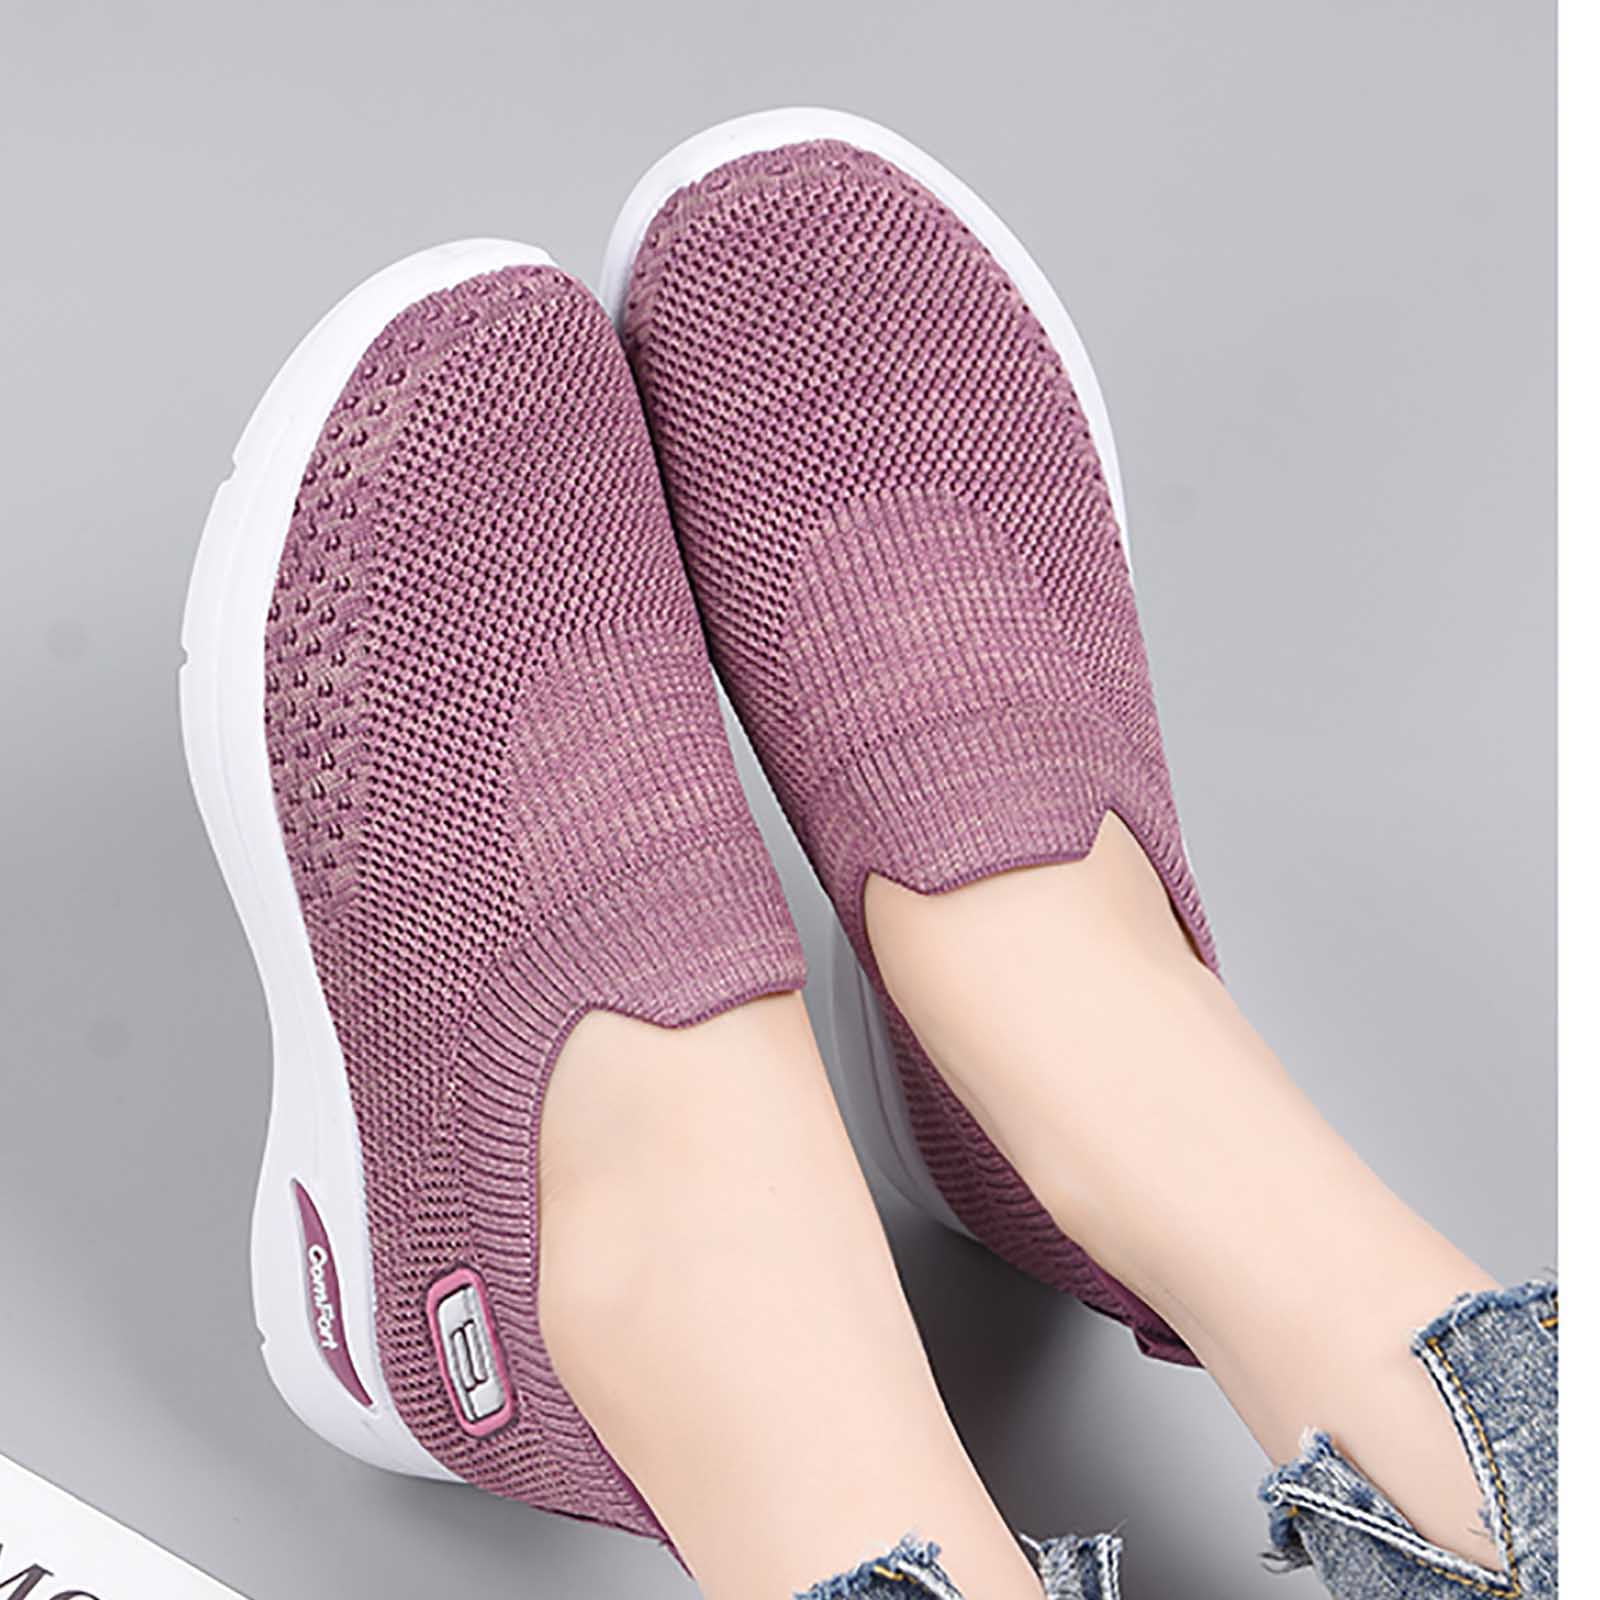 Black and Friday Clearance Items under $5 asdoklhq Women Sneakers Clearance  Under $15,New Sequined Women's Shoes foreign Trade Plus Size Sports Casual  Shoes 